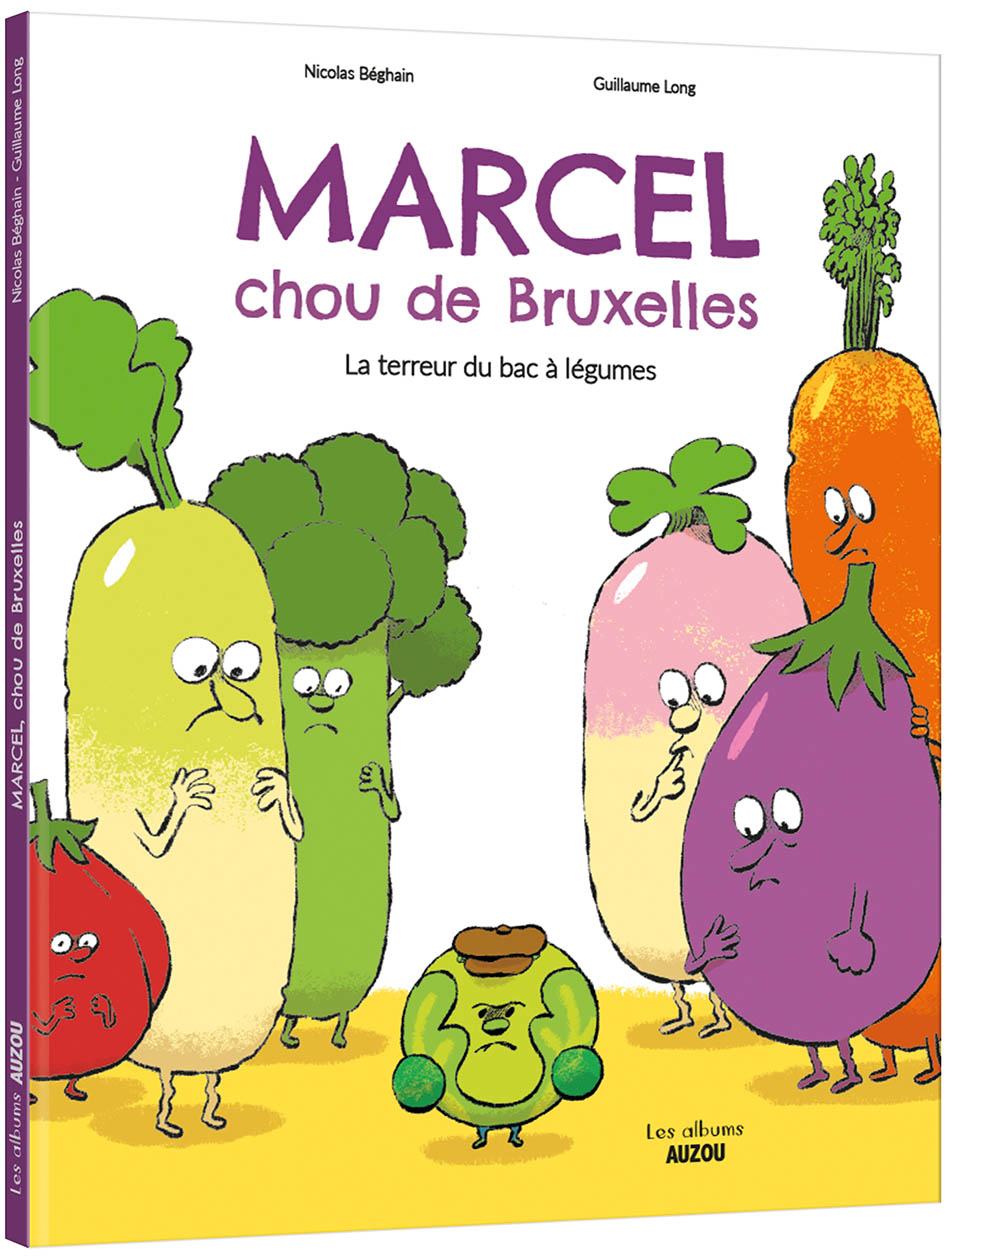 Marcel, The Brussel Sprout